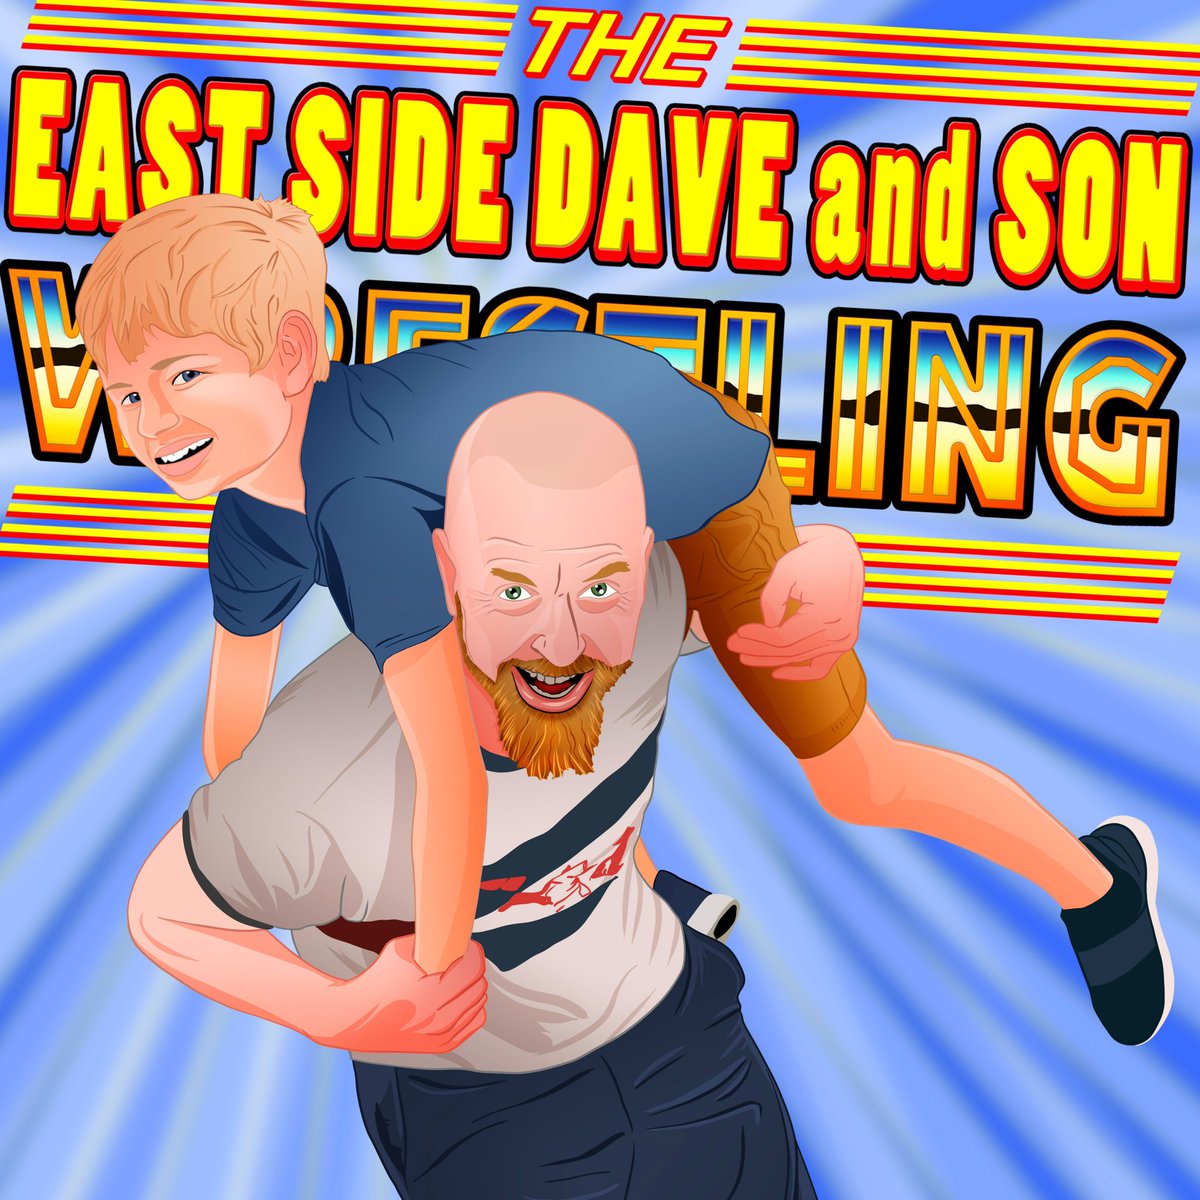 Happy #WrestleMania Day! Kick off the celebration with The East Side Dave & Son Wrestling Show! The Mac Boyz talk @WWE Mania, @AEW mistakes, and Dave at @WrestlingIWF! Listen on EastSideDaveCountry.com or wherever you get your podcasts! Enjoy WrestleMania! BAM!